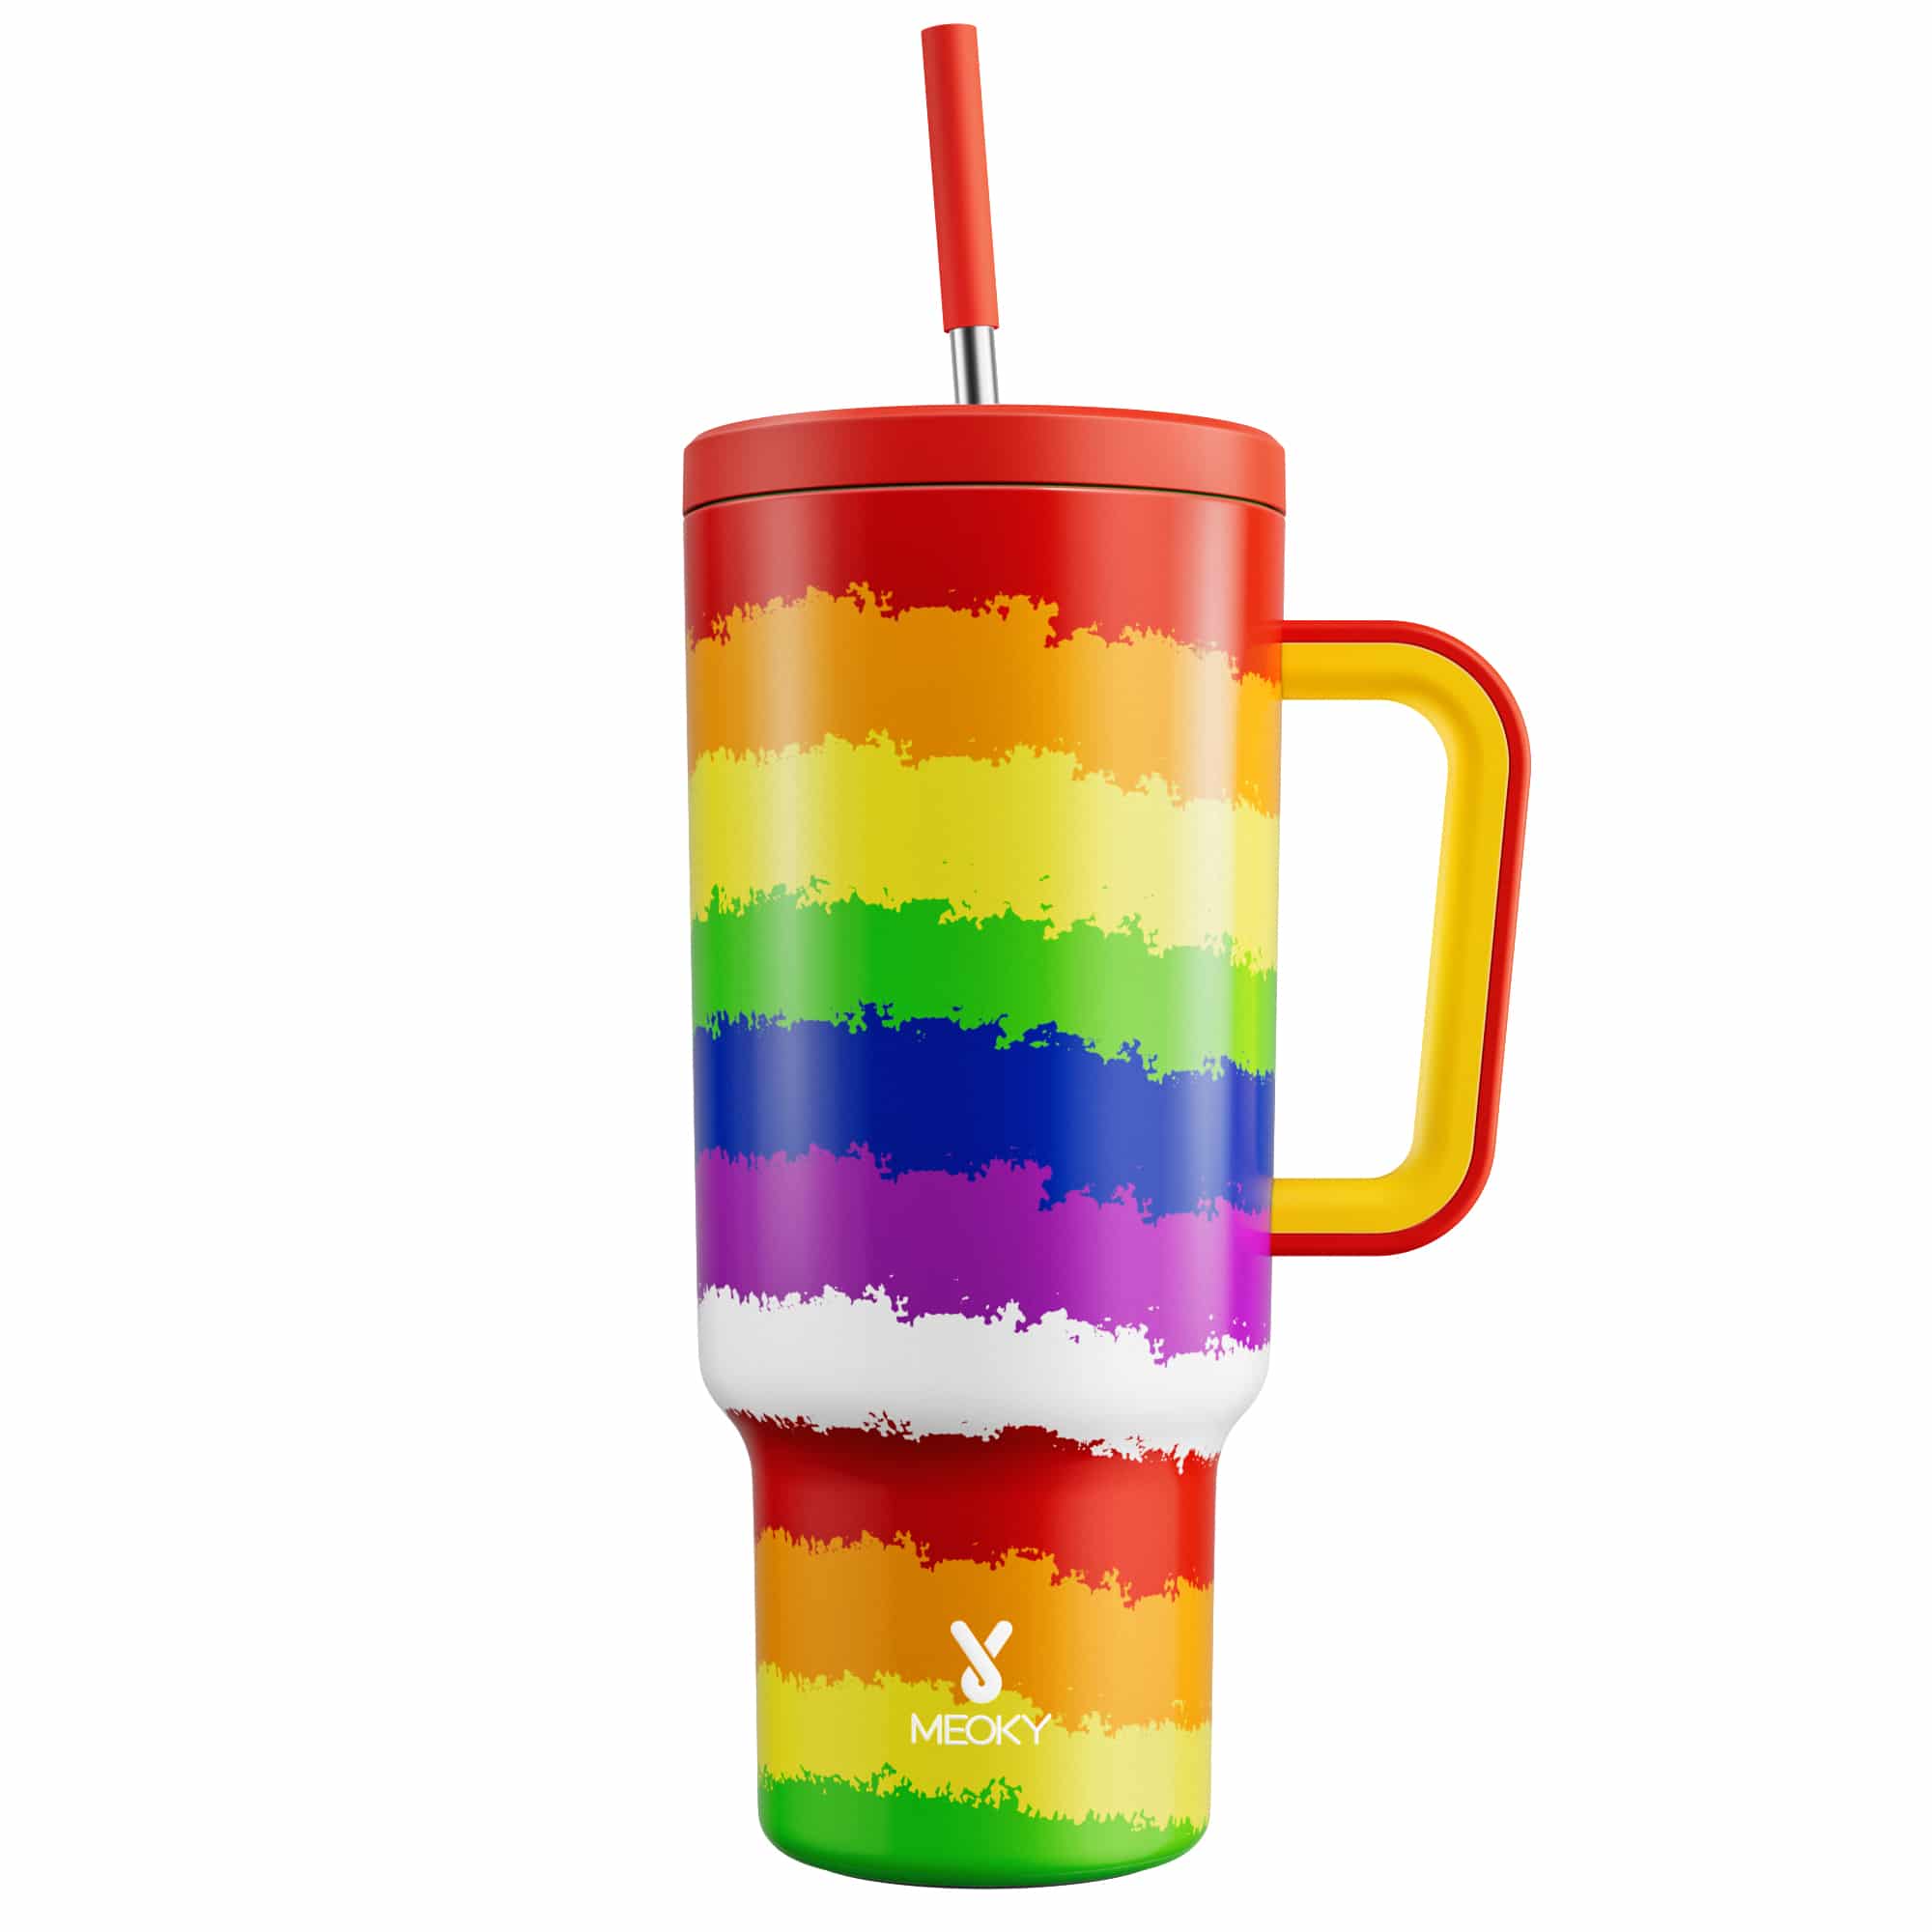 Meoky 40oz Tumbler with Handle and Straw Lid -PrideStripes